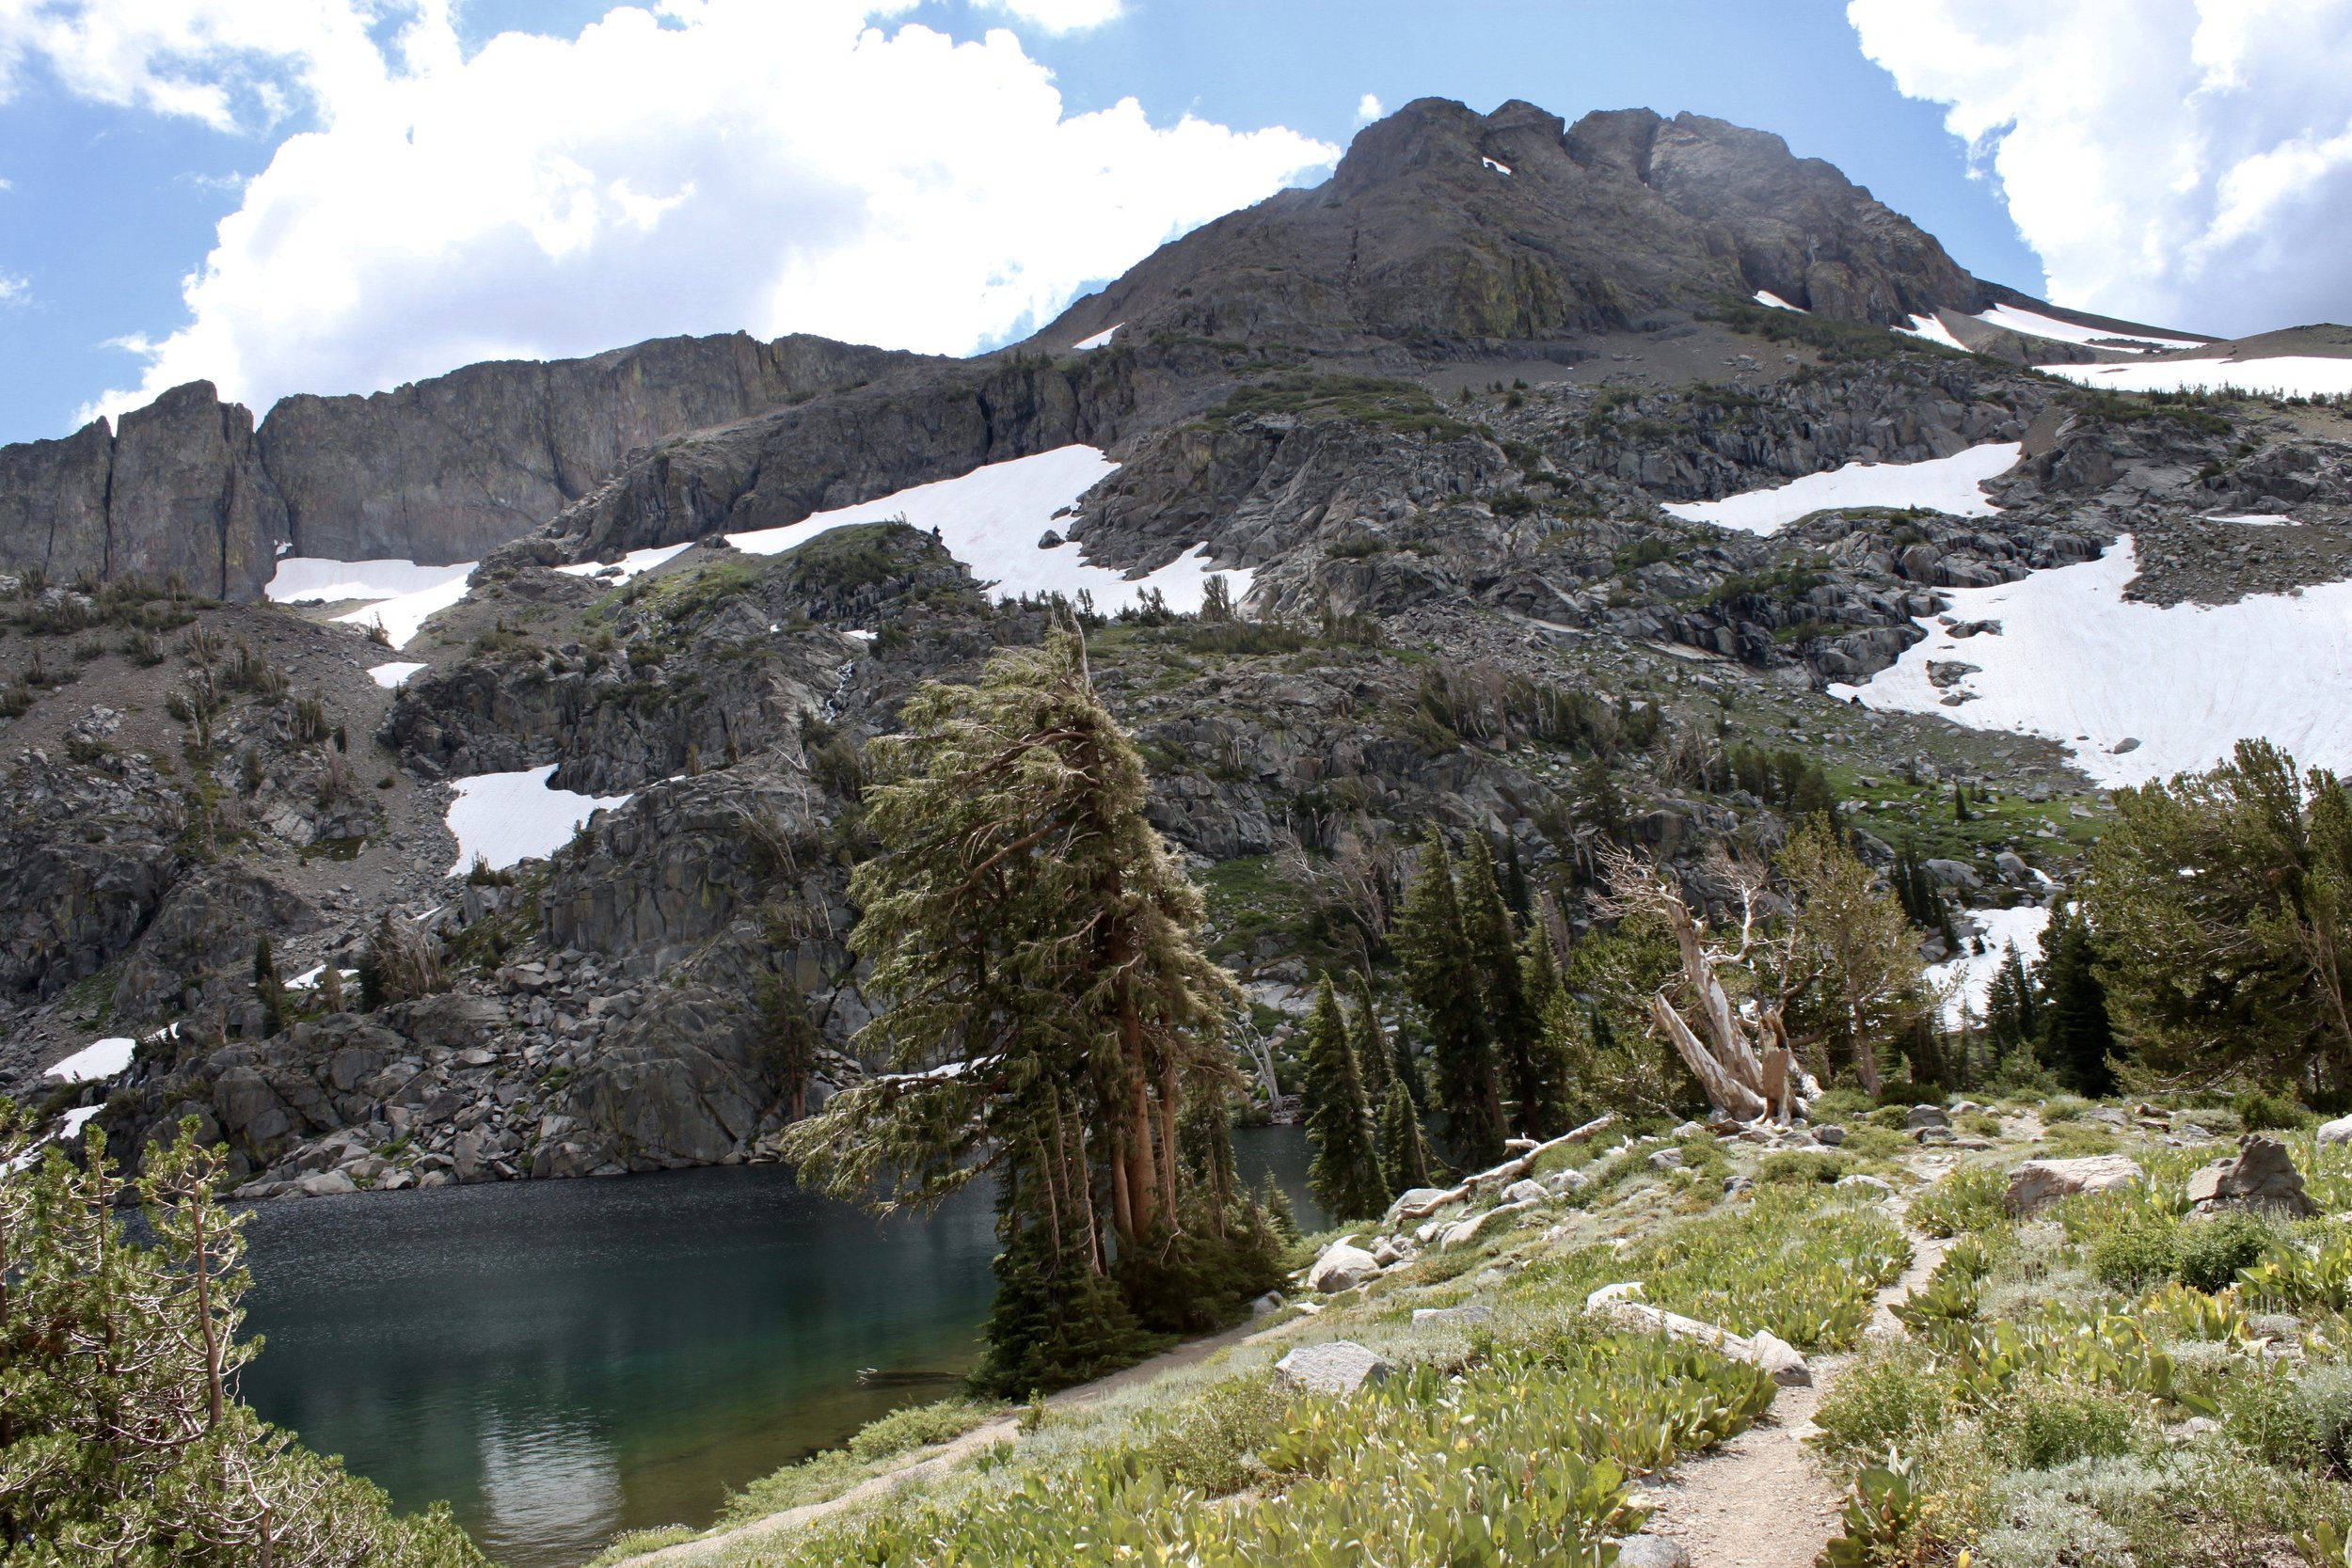   Lake Winnemucca was the second of three alpine lakes along the trail.  